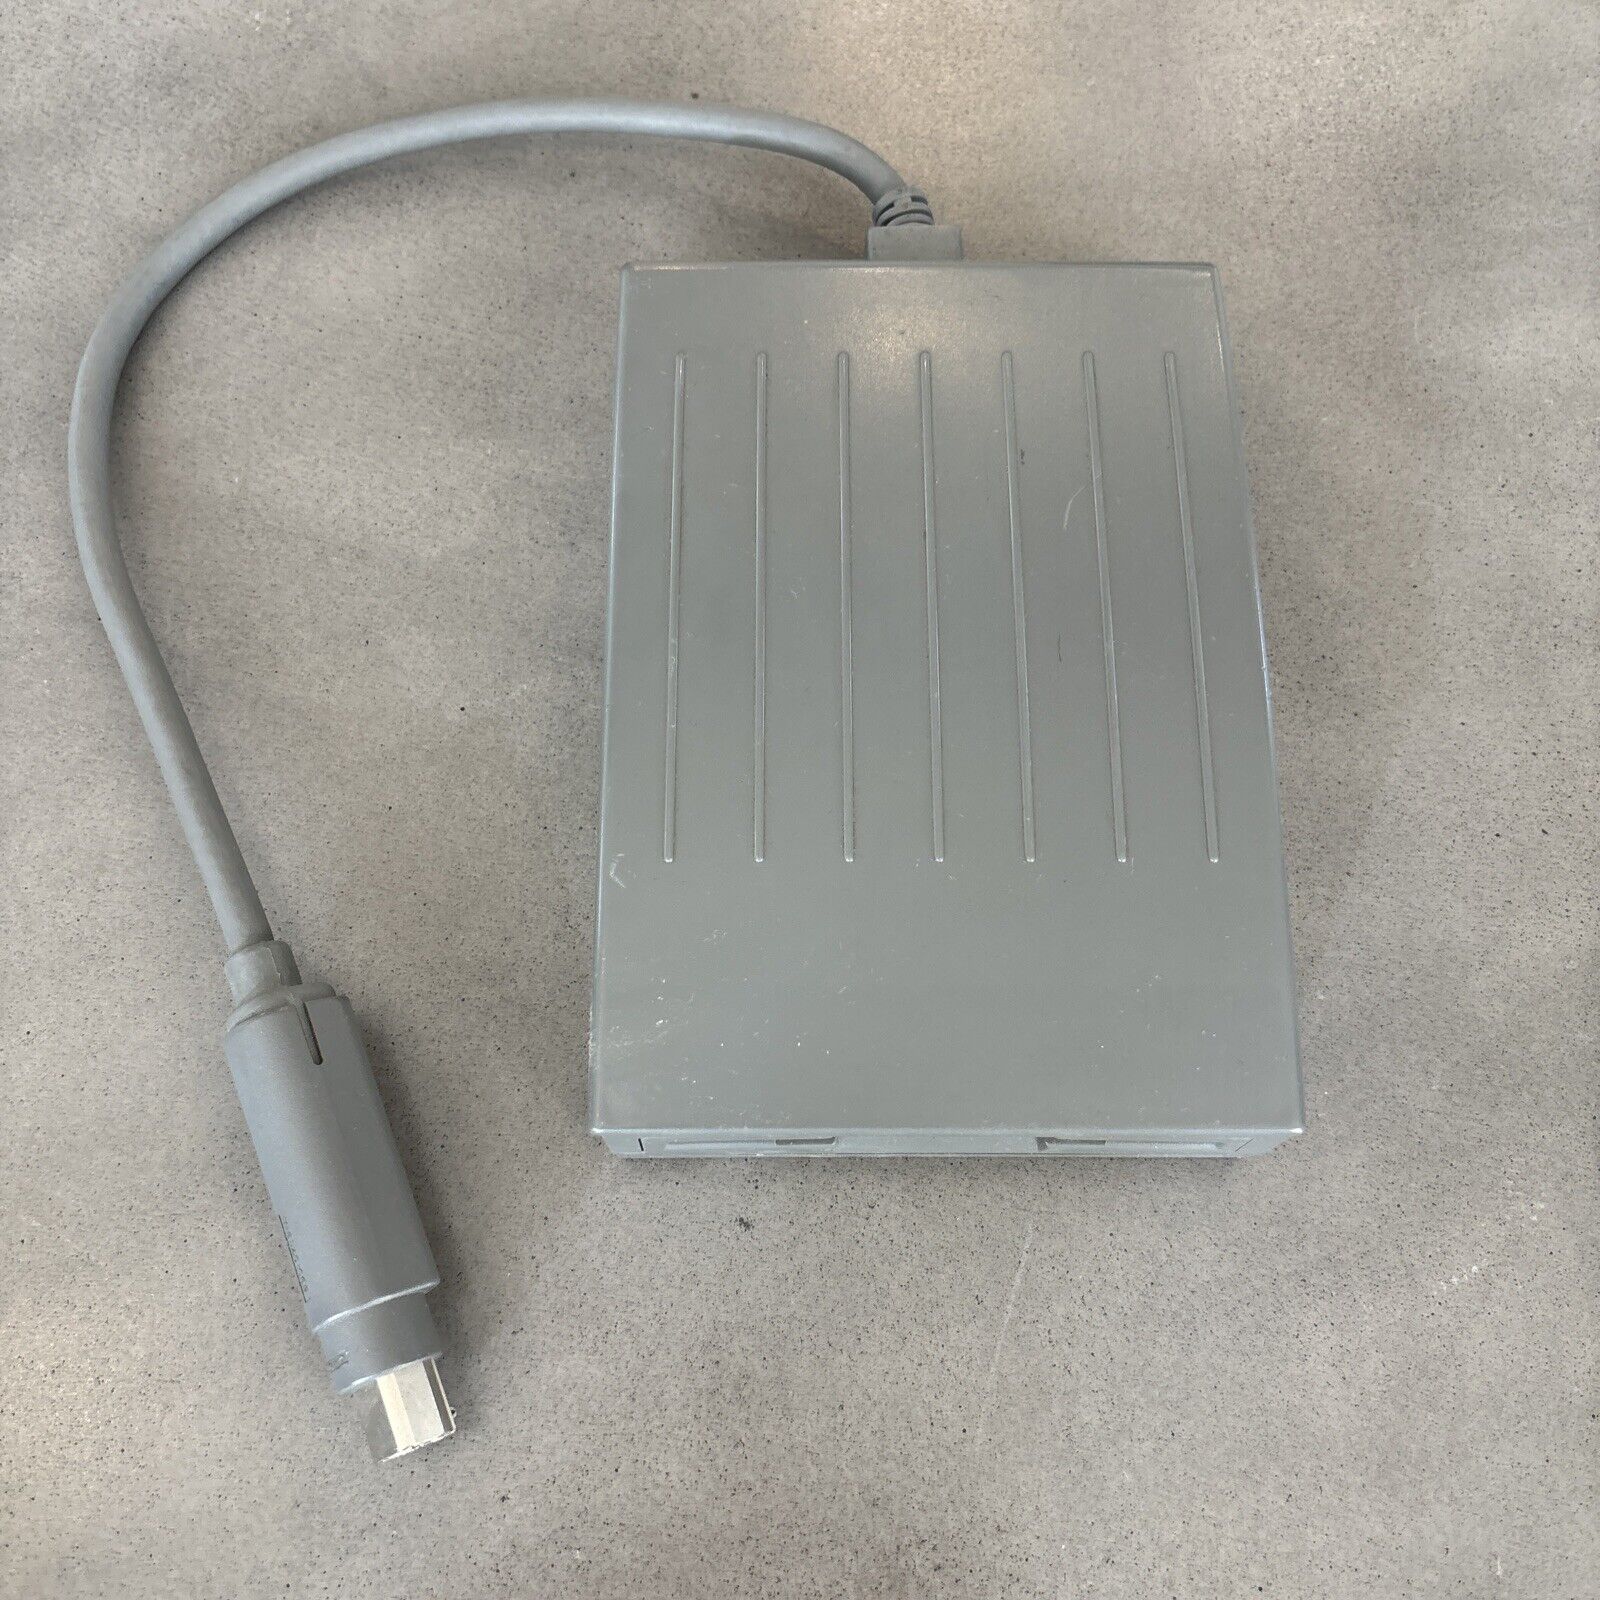 Newer Technology PowerBook Duo HDI-20 1.44MB Floppy Drive